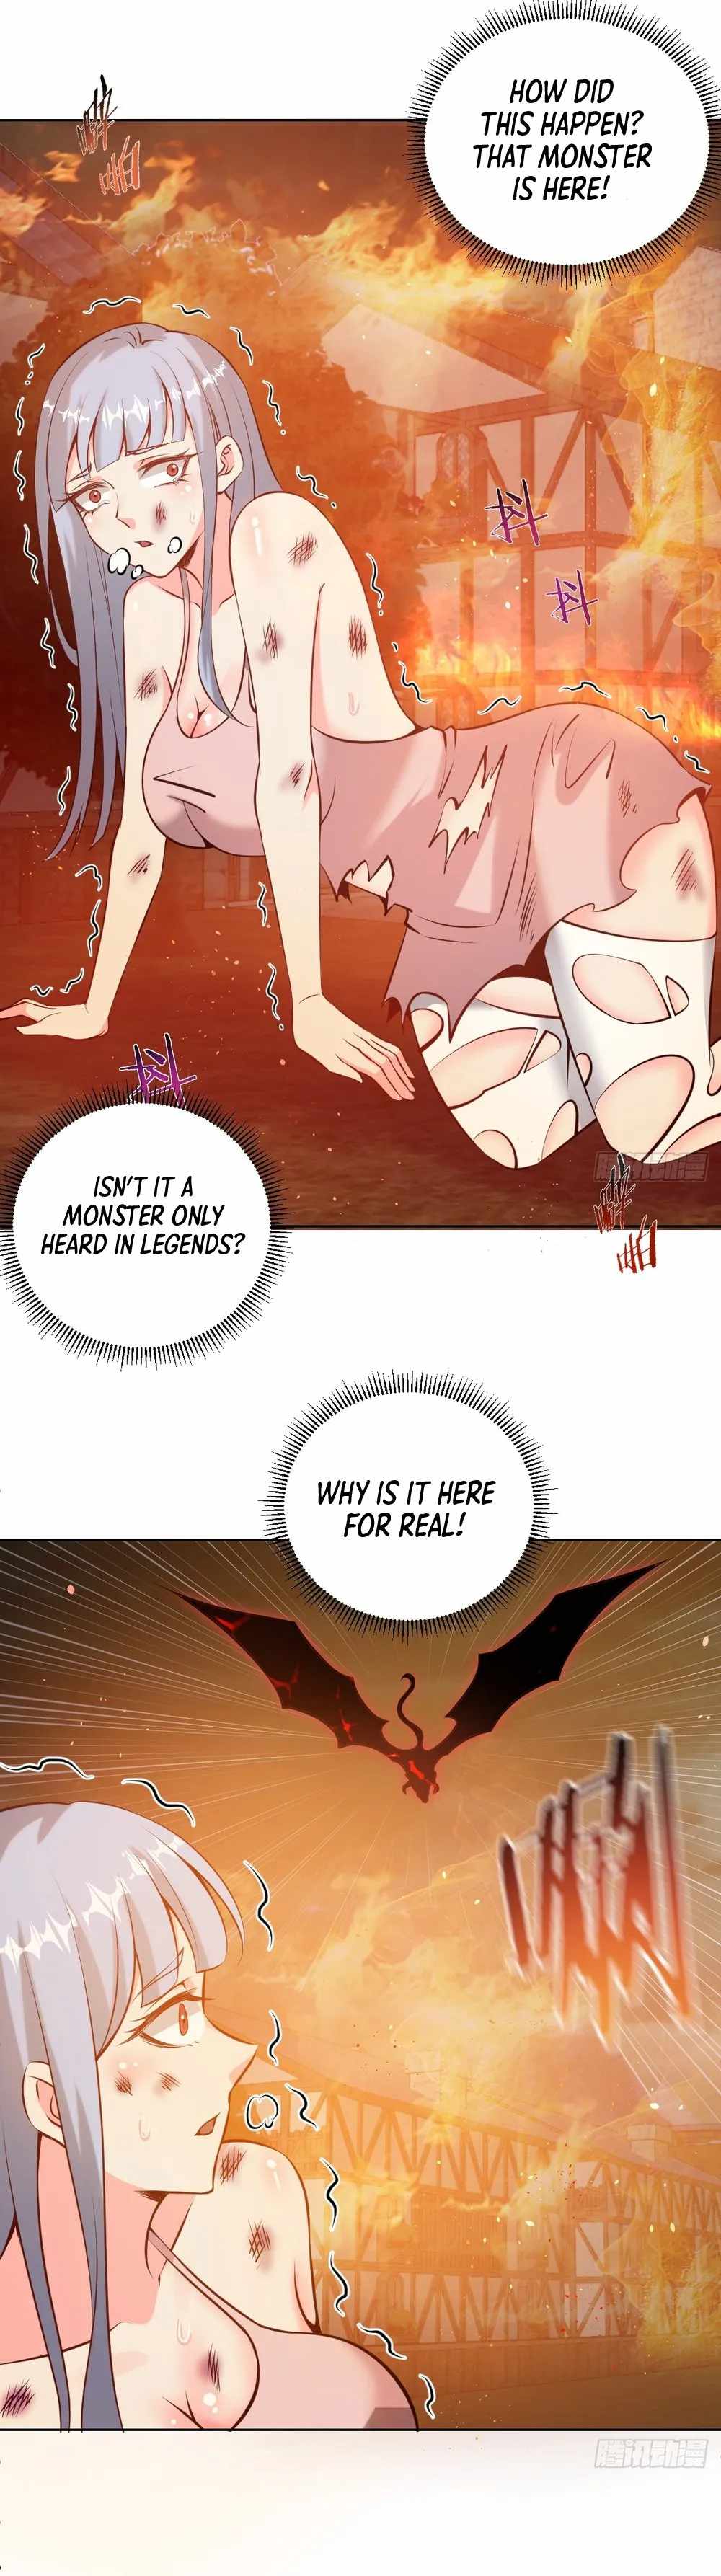 The Last Cultivator Chapter 17-eng-li - Page 2